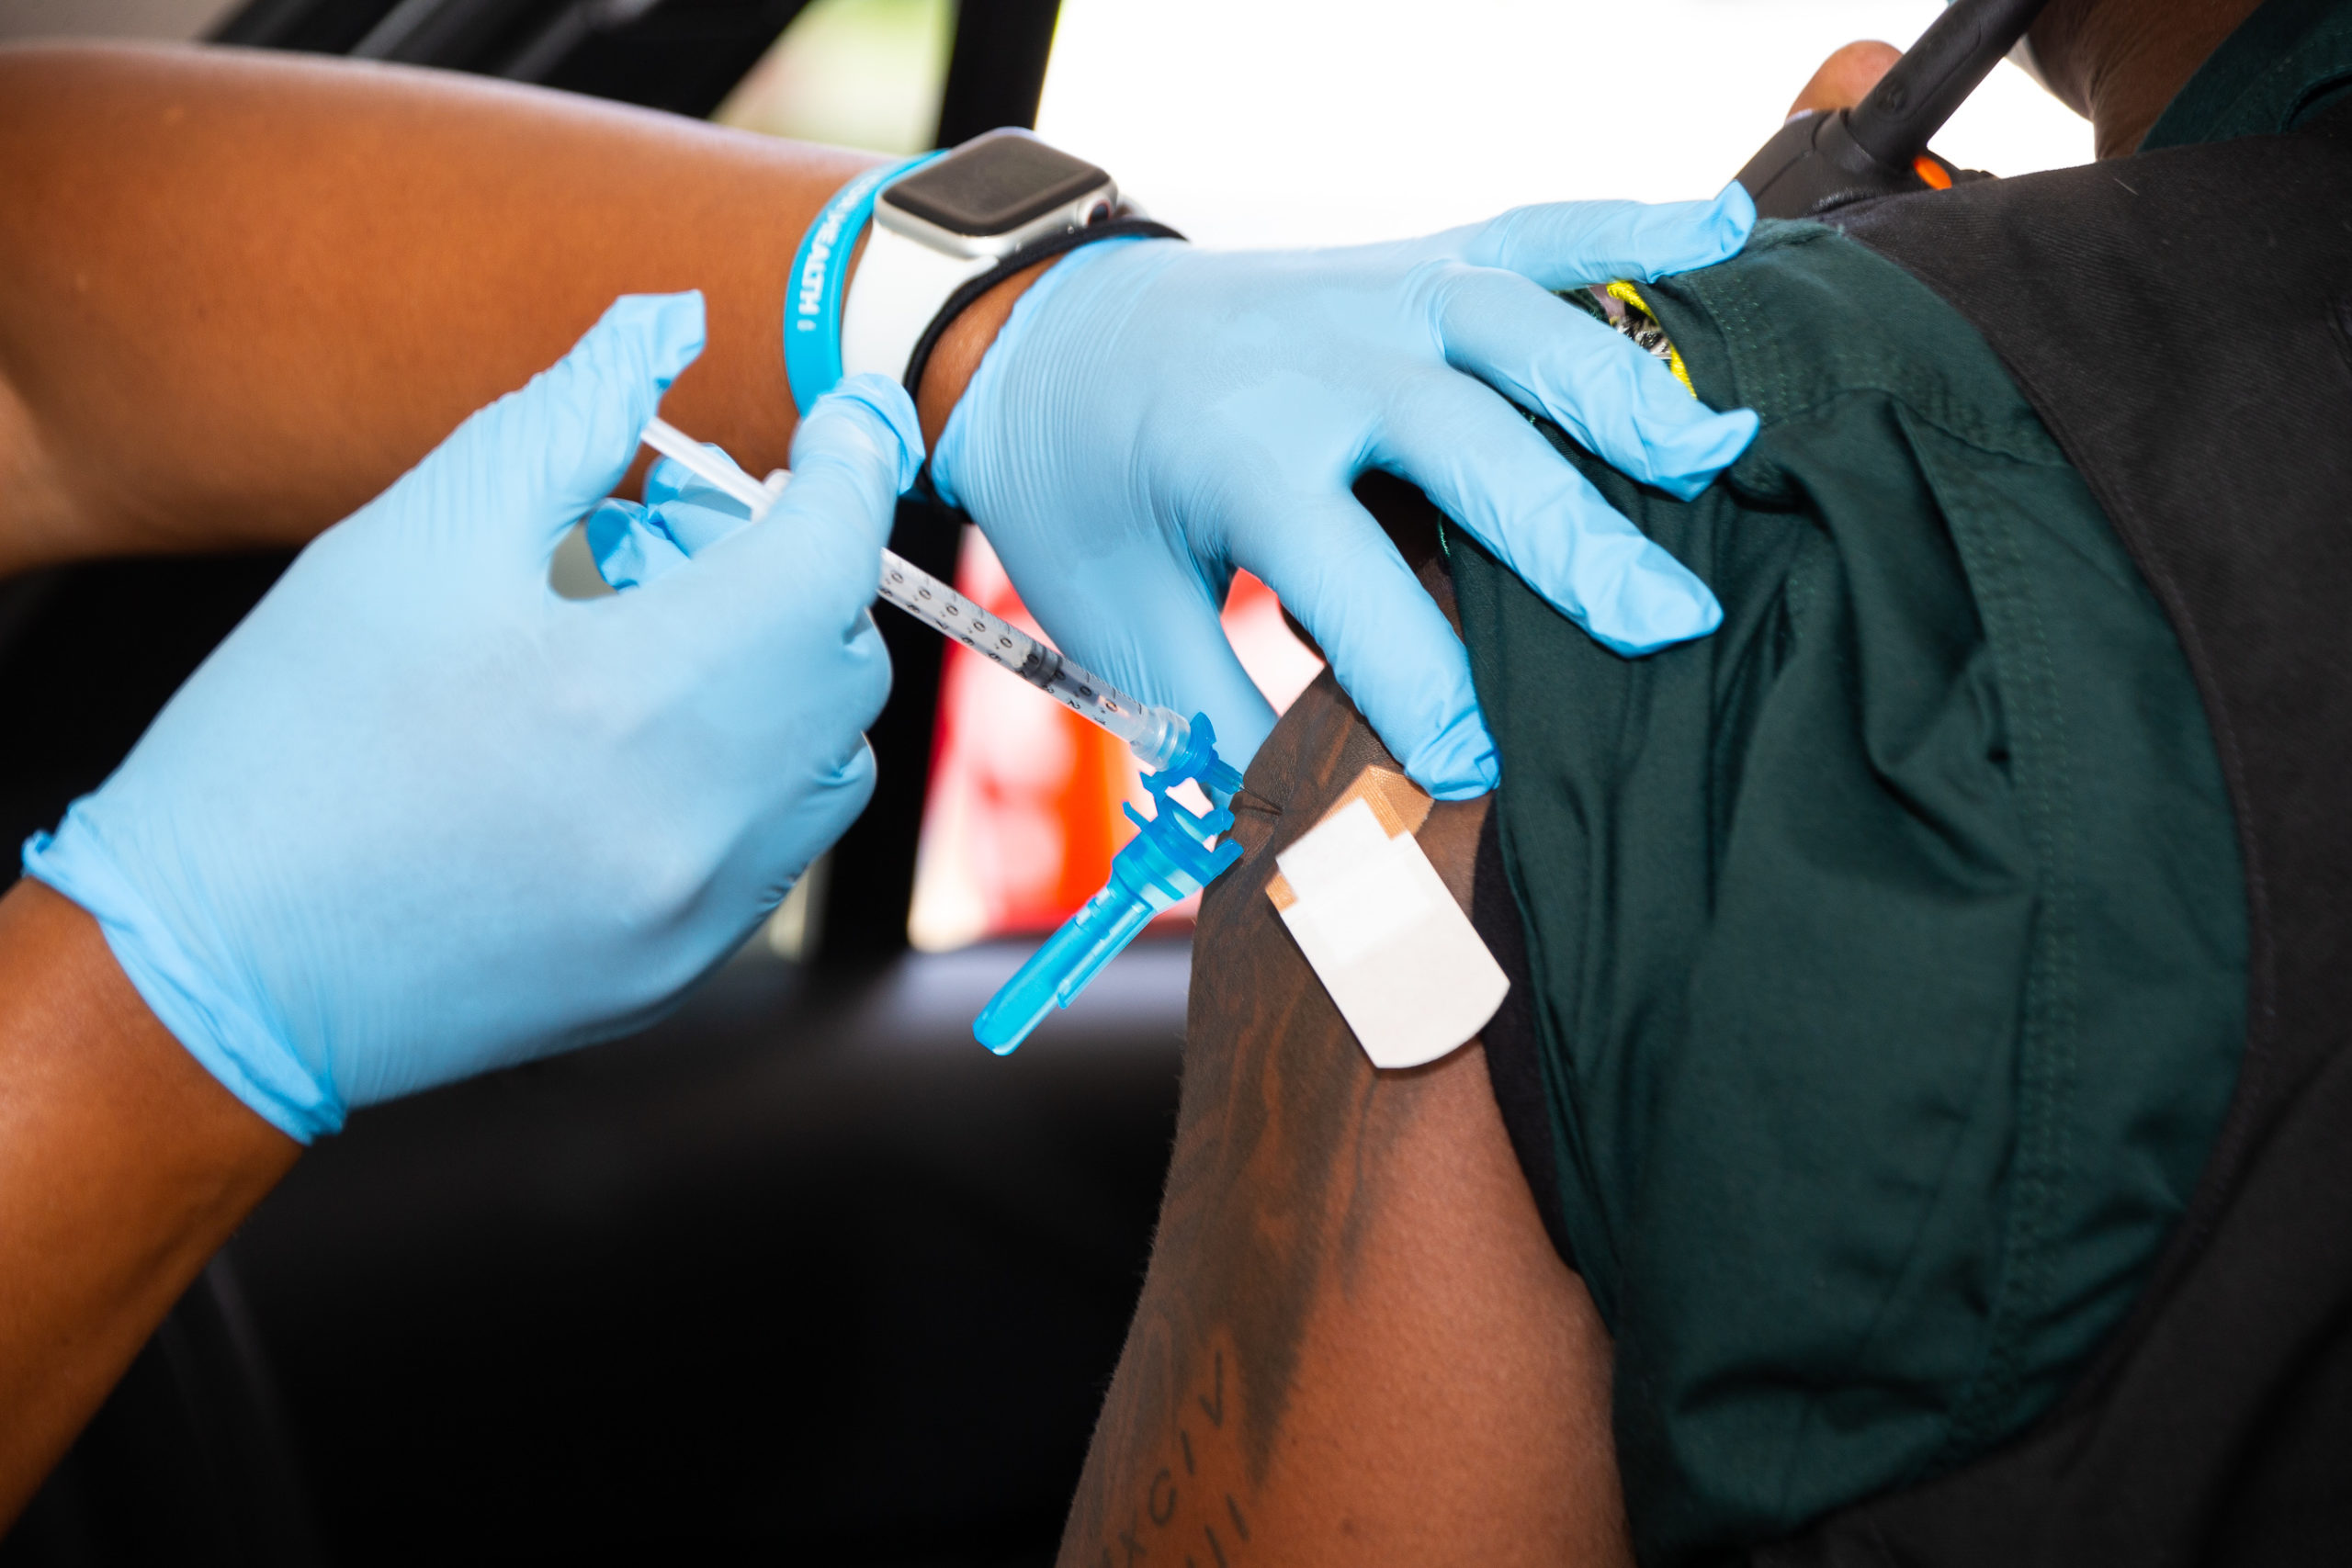 hands on arm administering a COVID-19 vaccine